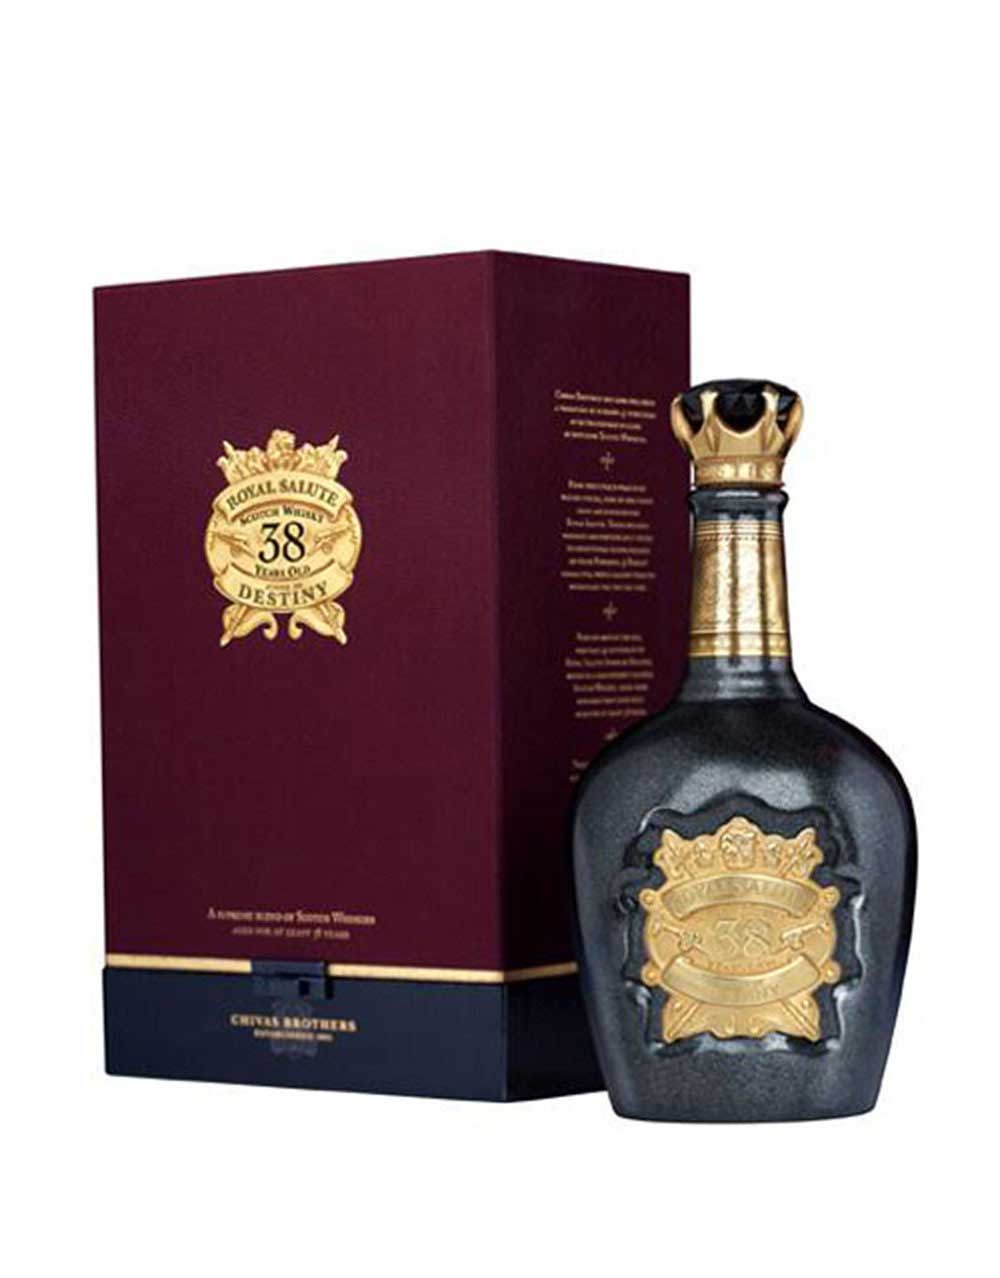 Crown Royal Monarch 75th Anniversary Whisky